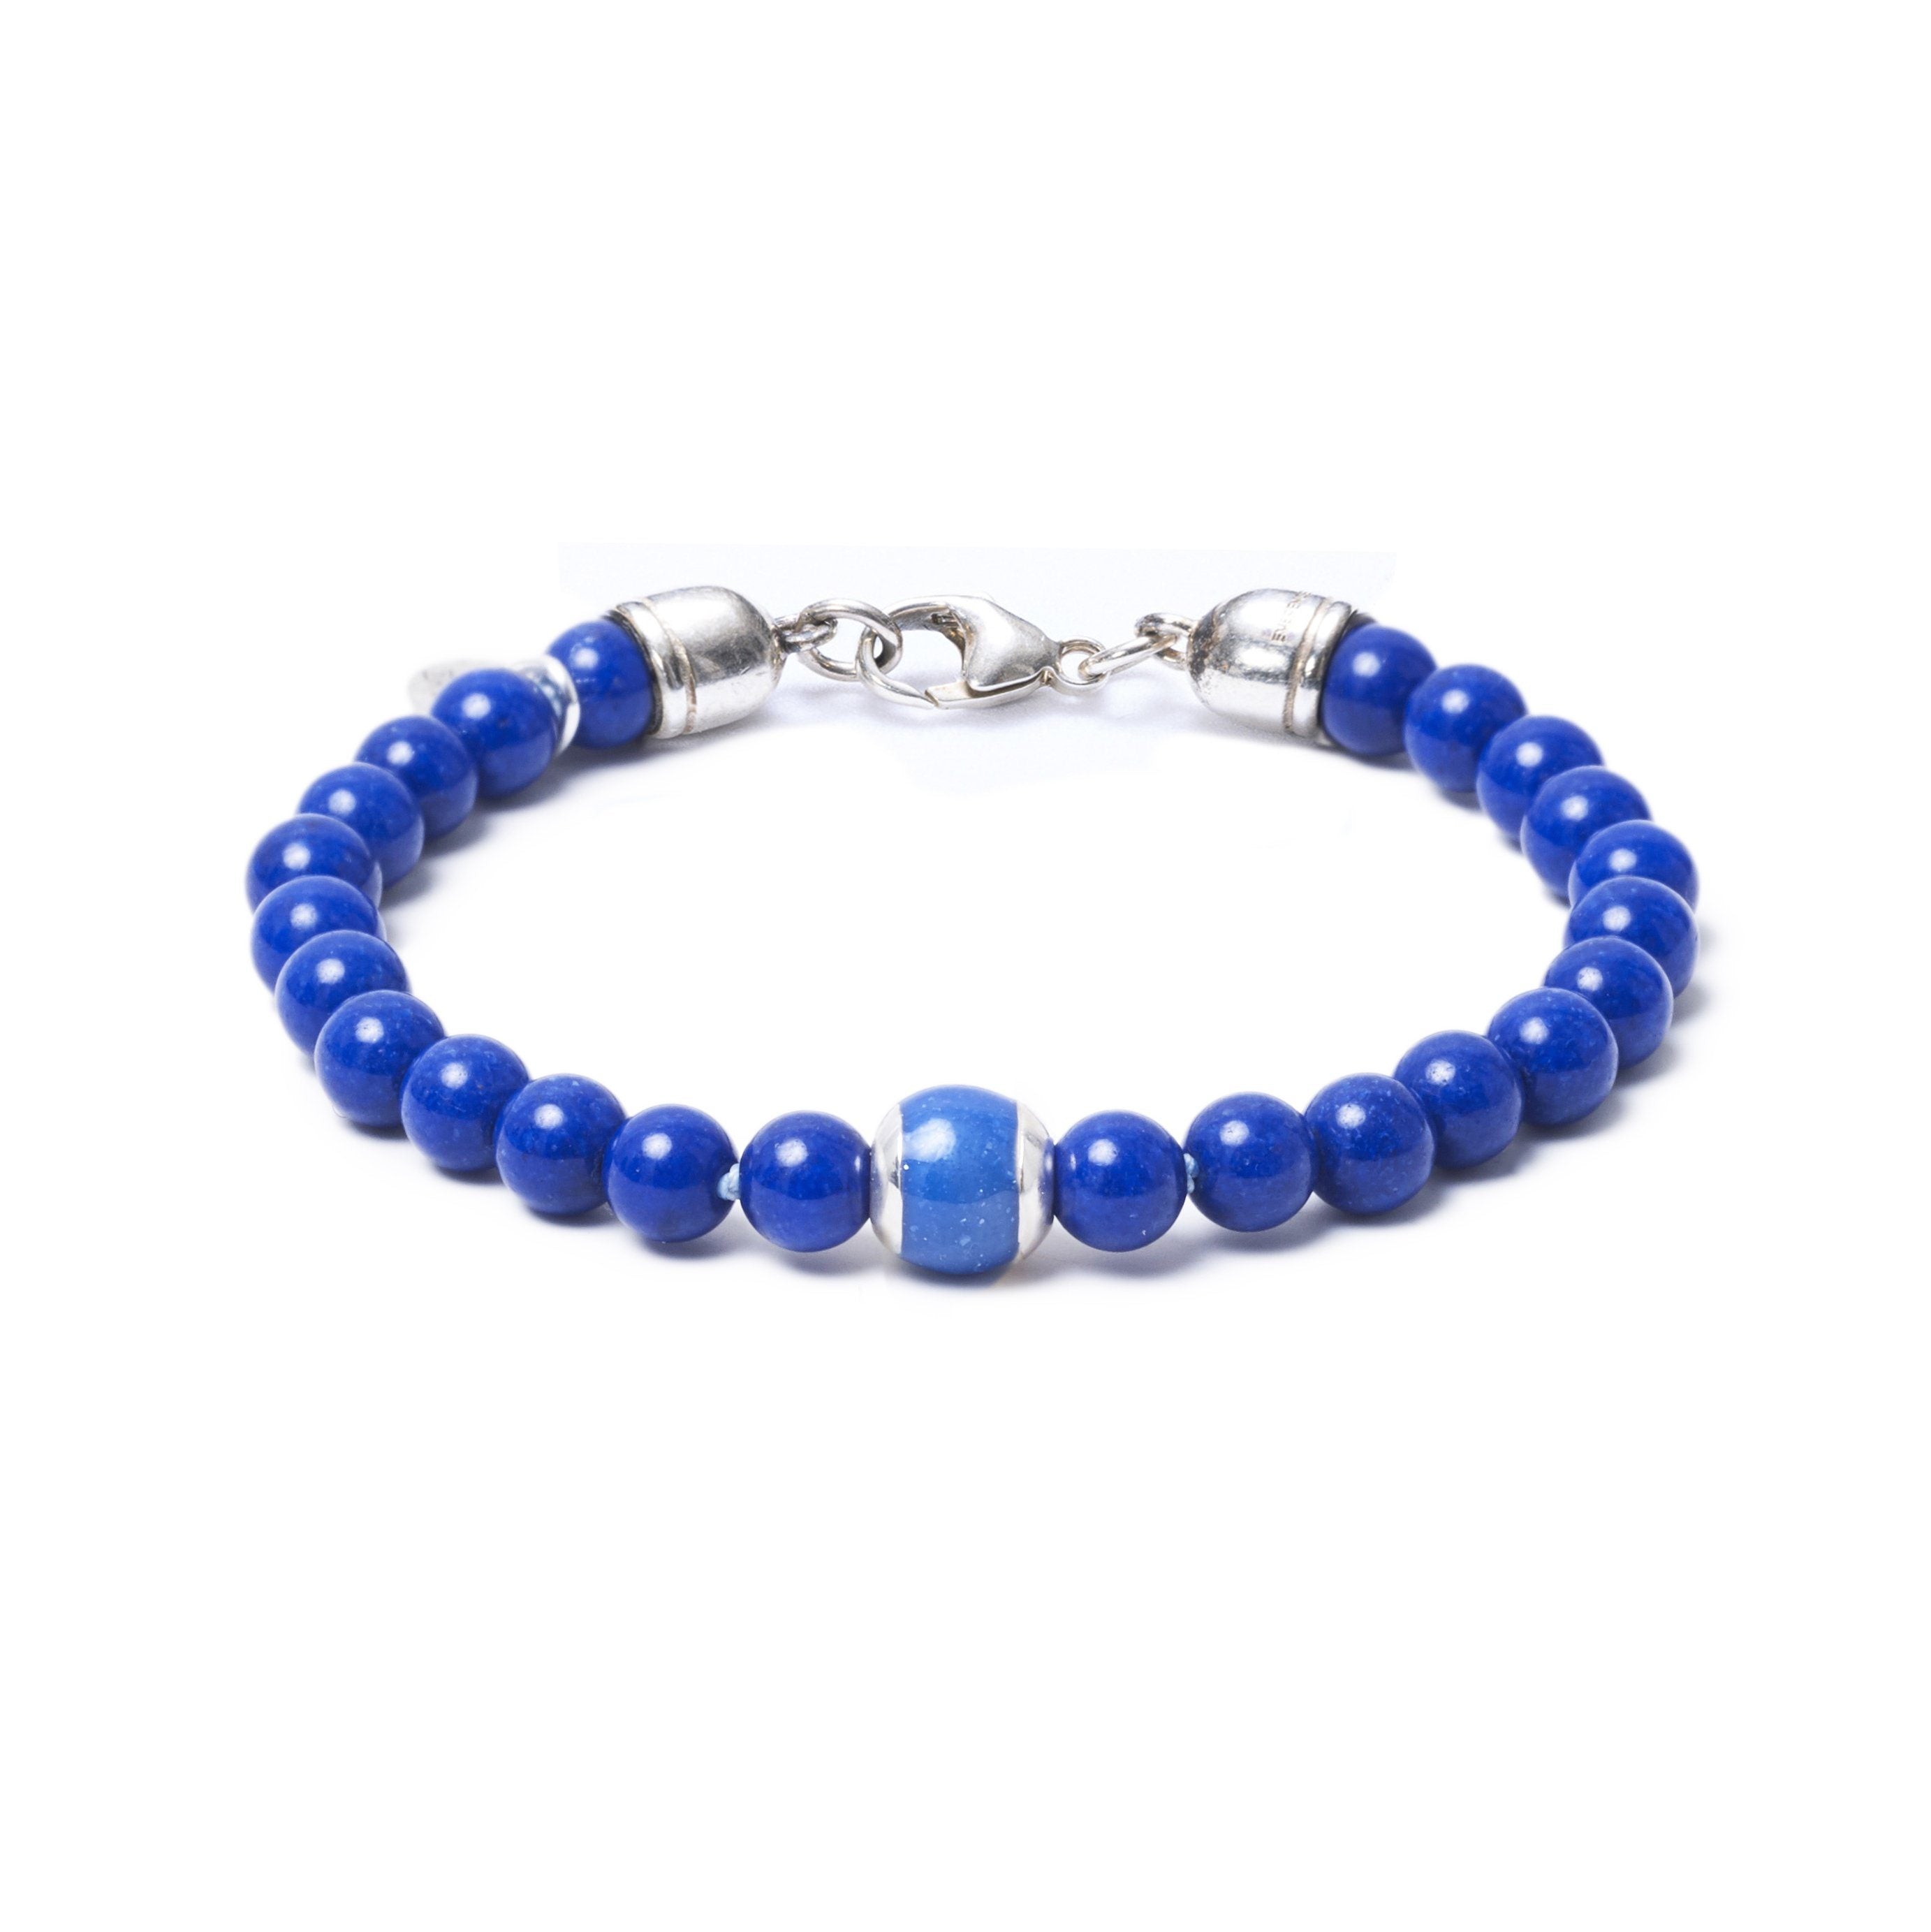 Lapis Lazuli, One Everence Bead everence.life Blue Lobster Claw 7